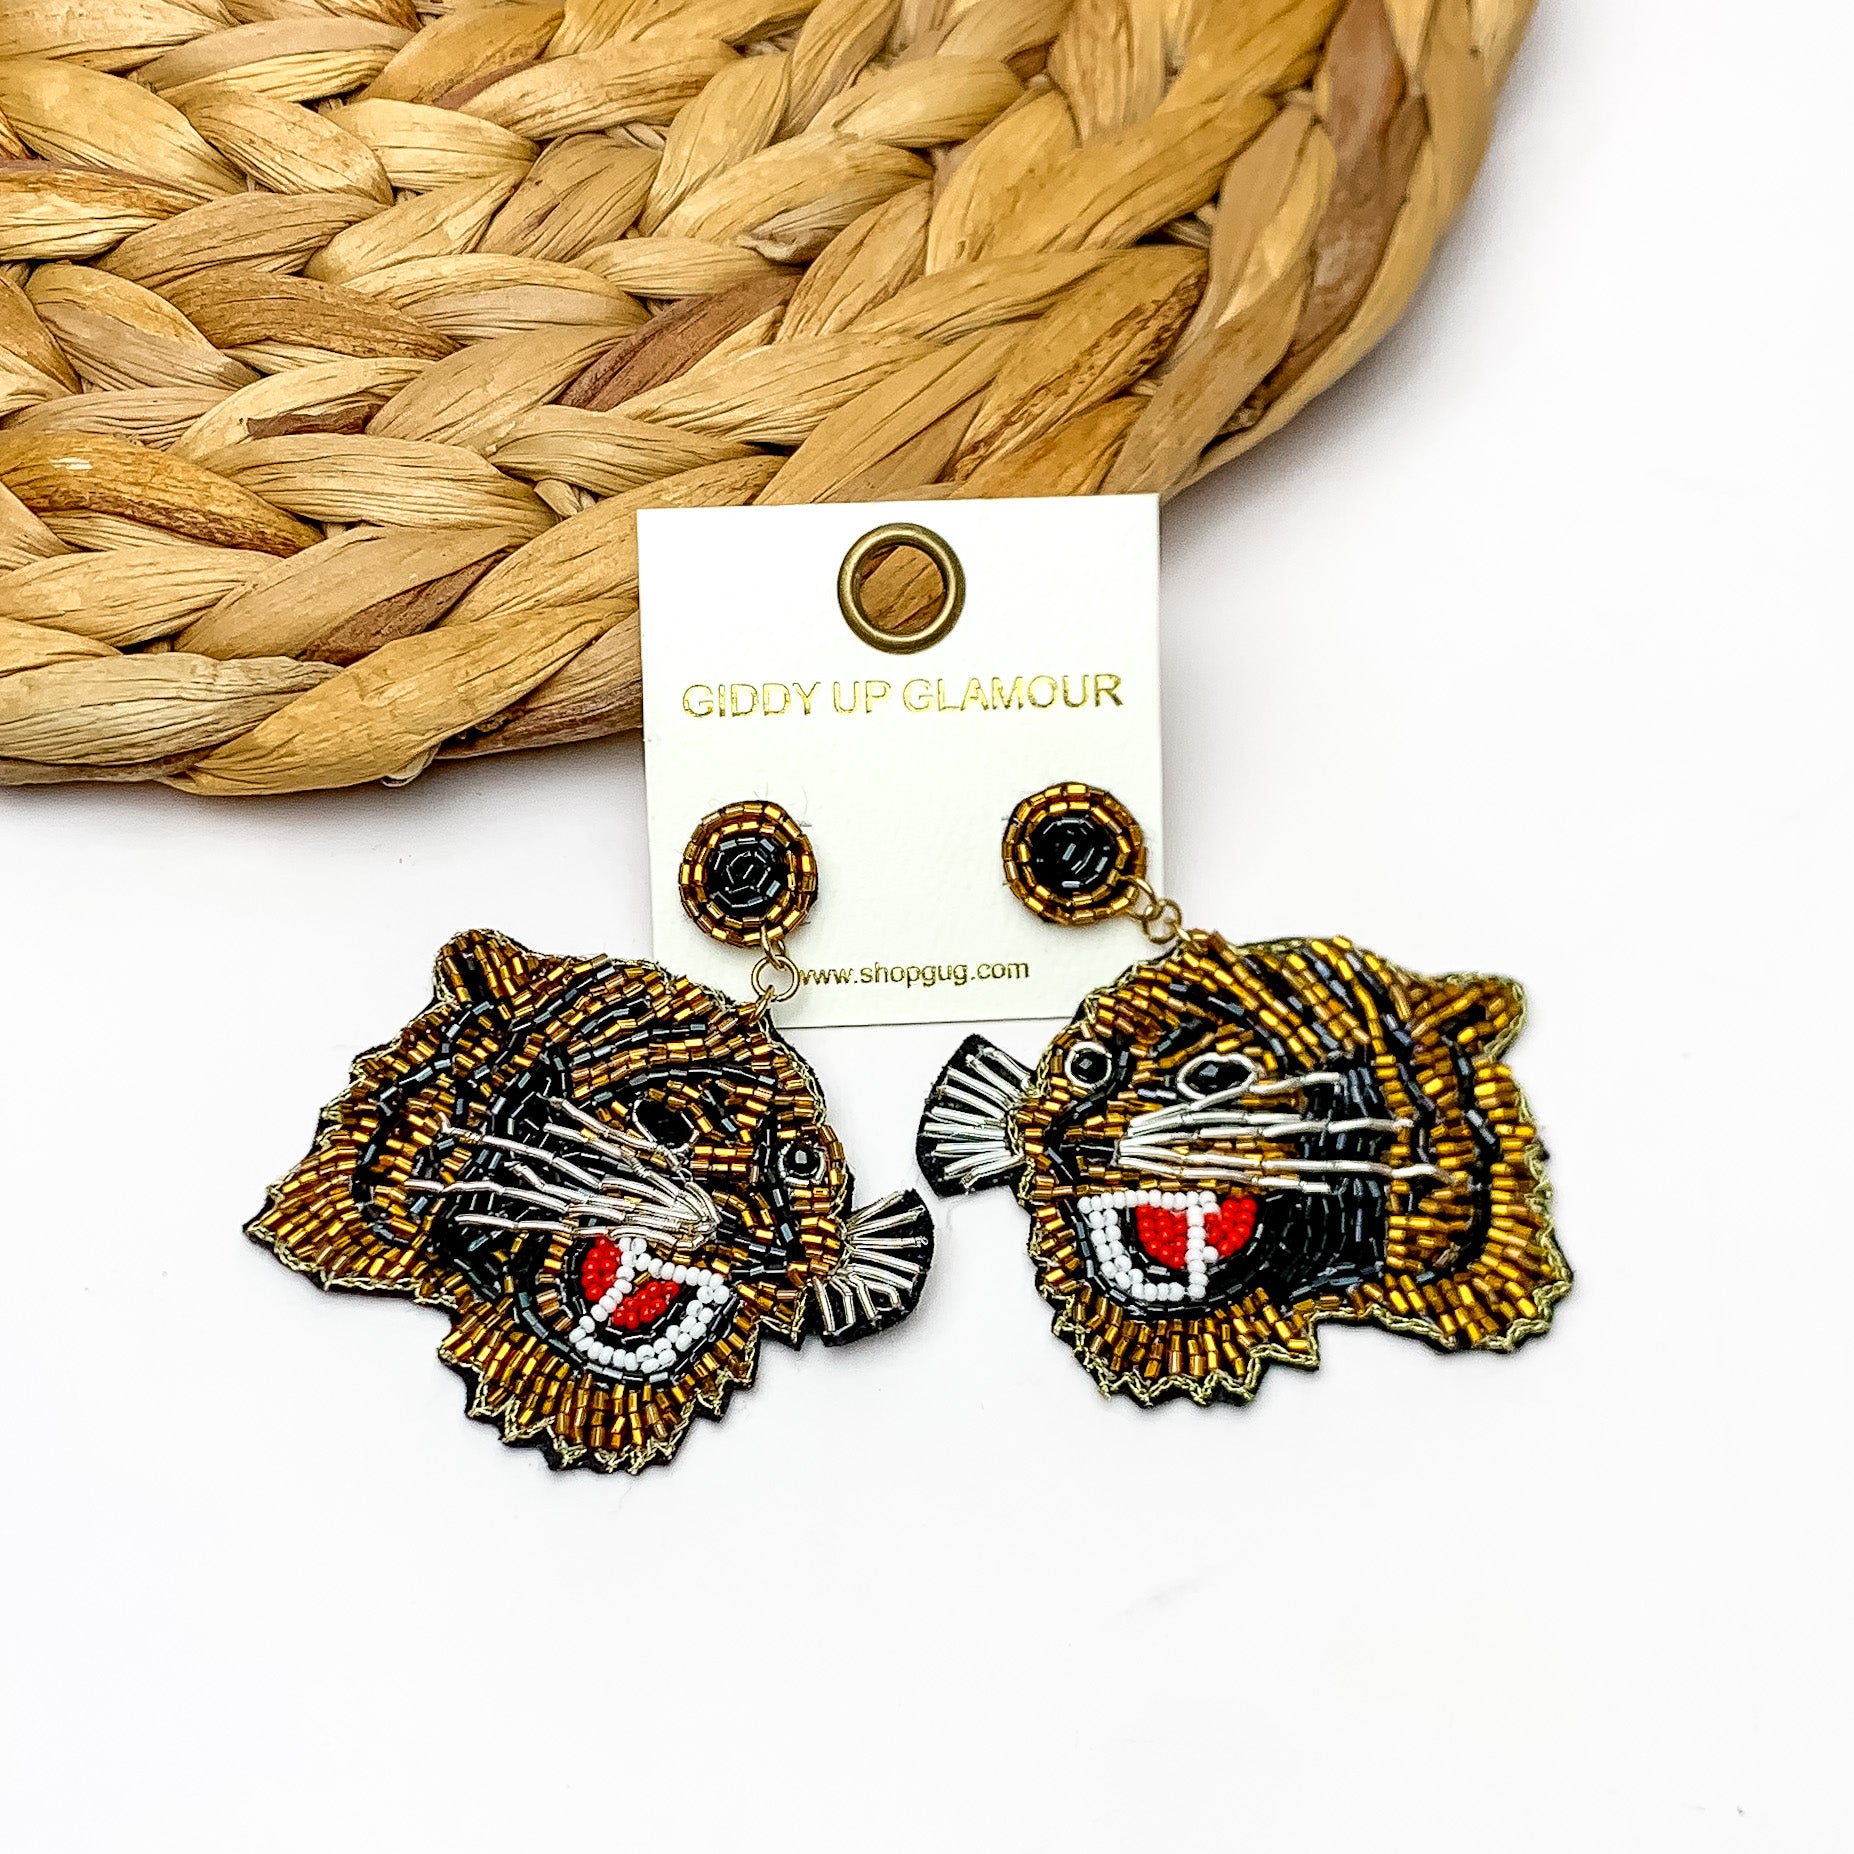 Tiger Beaded Drop Earrings in Gold and Black. The earrings are laying against a woven piece. The background of the picture is white.